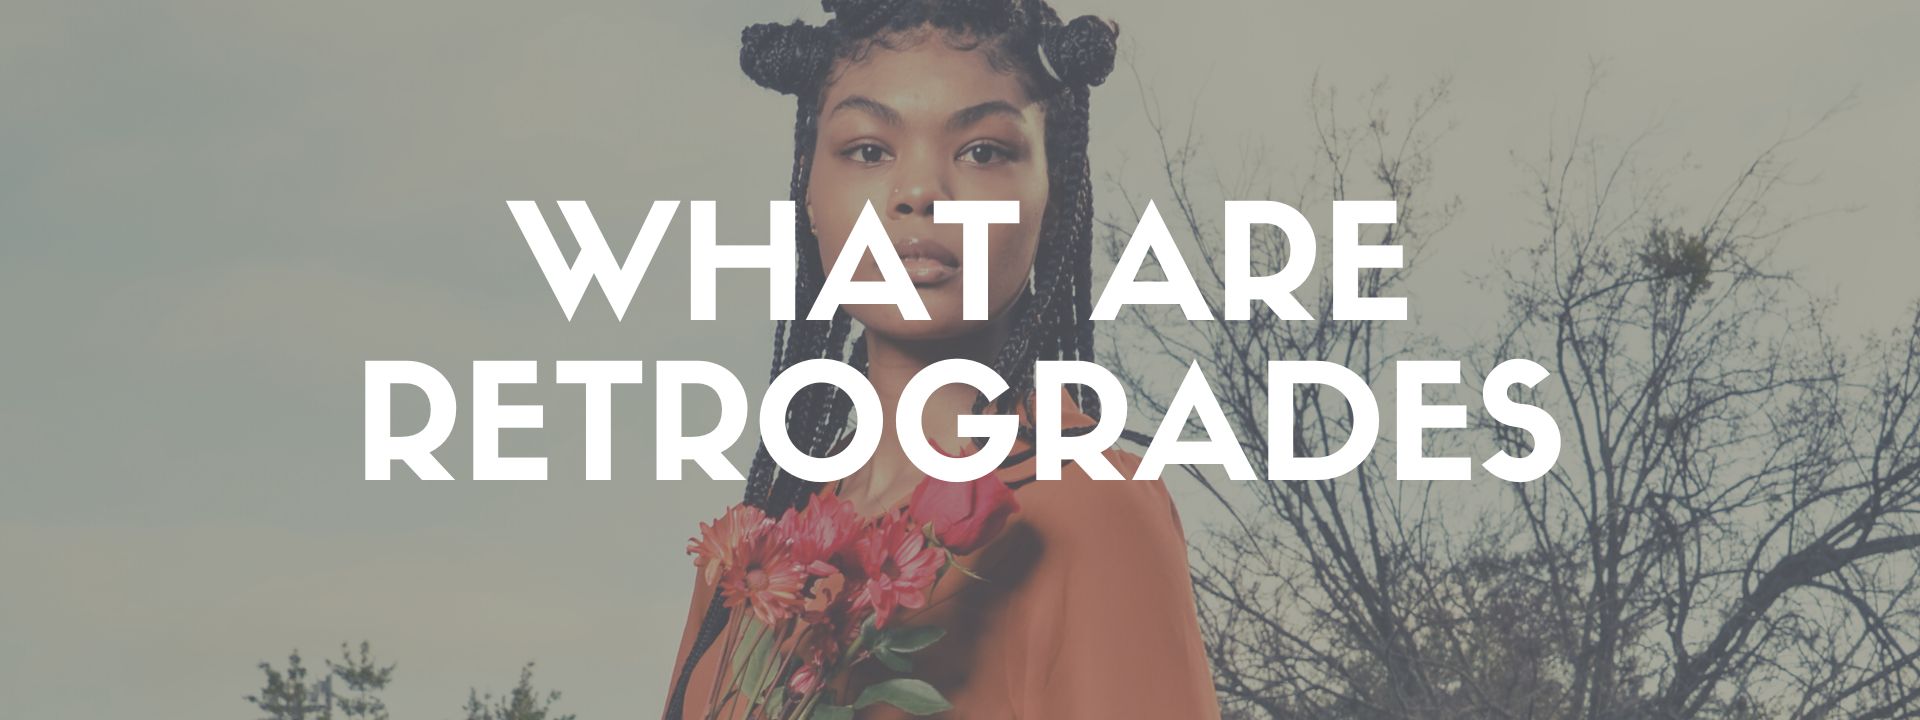 What to Do When Retrogrades End - The Dark Pixie Astrology